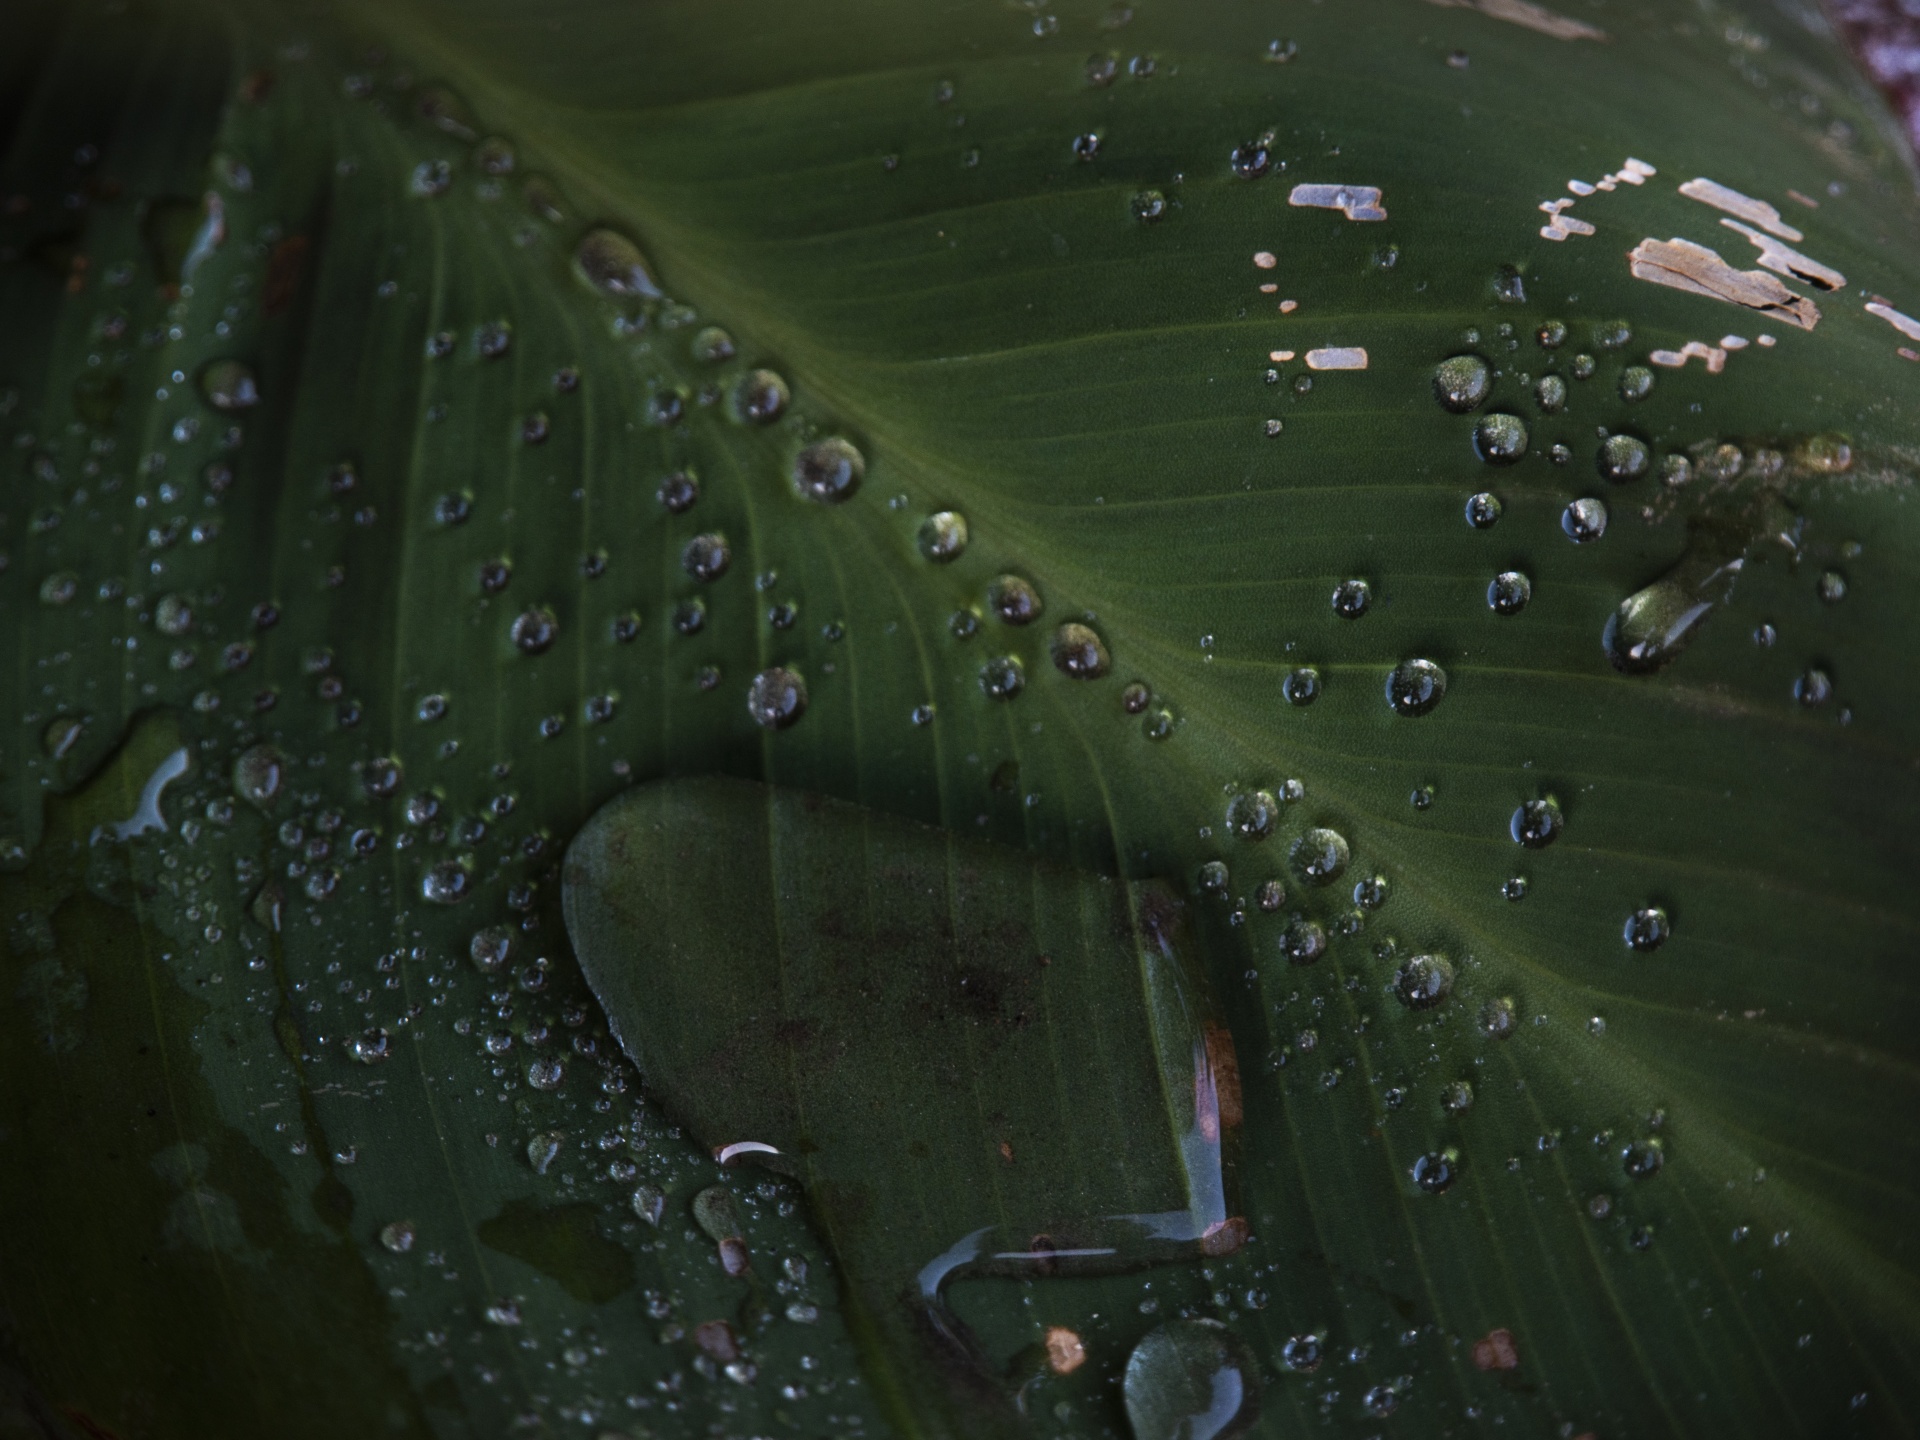 Water droplet sitting on a large canas leaf with smaller droplets in a string.